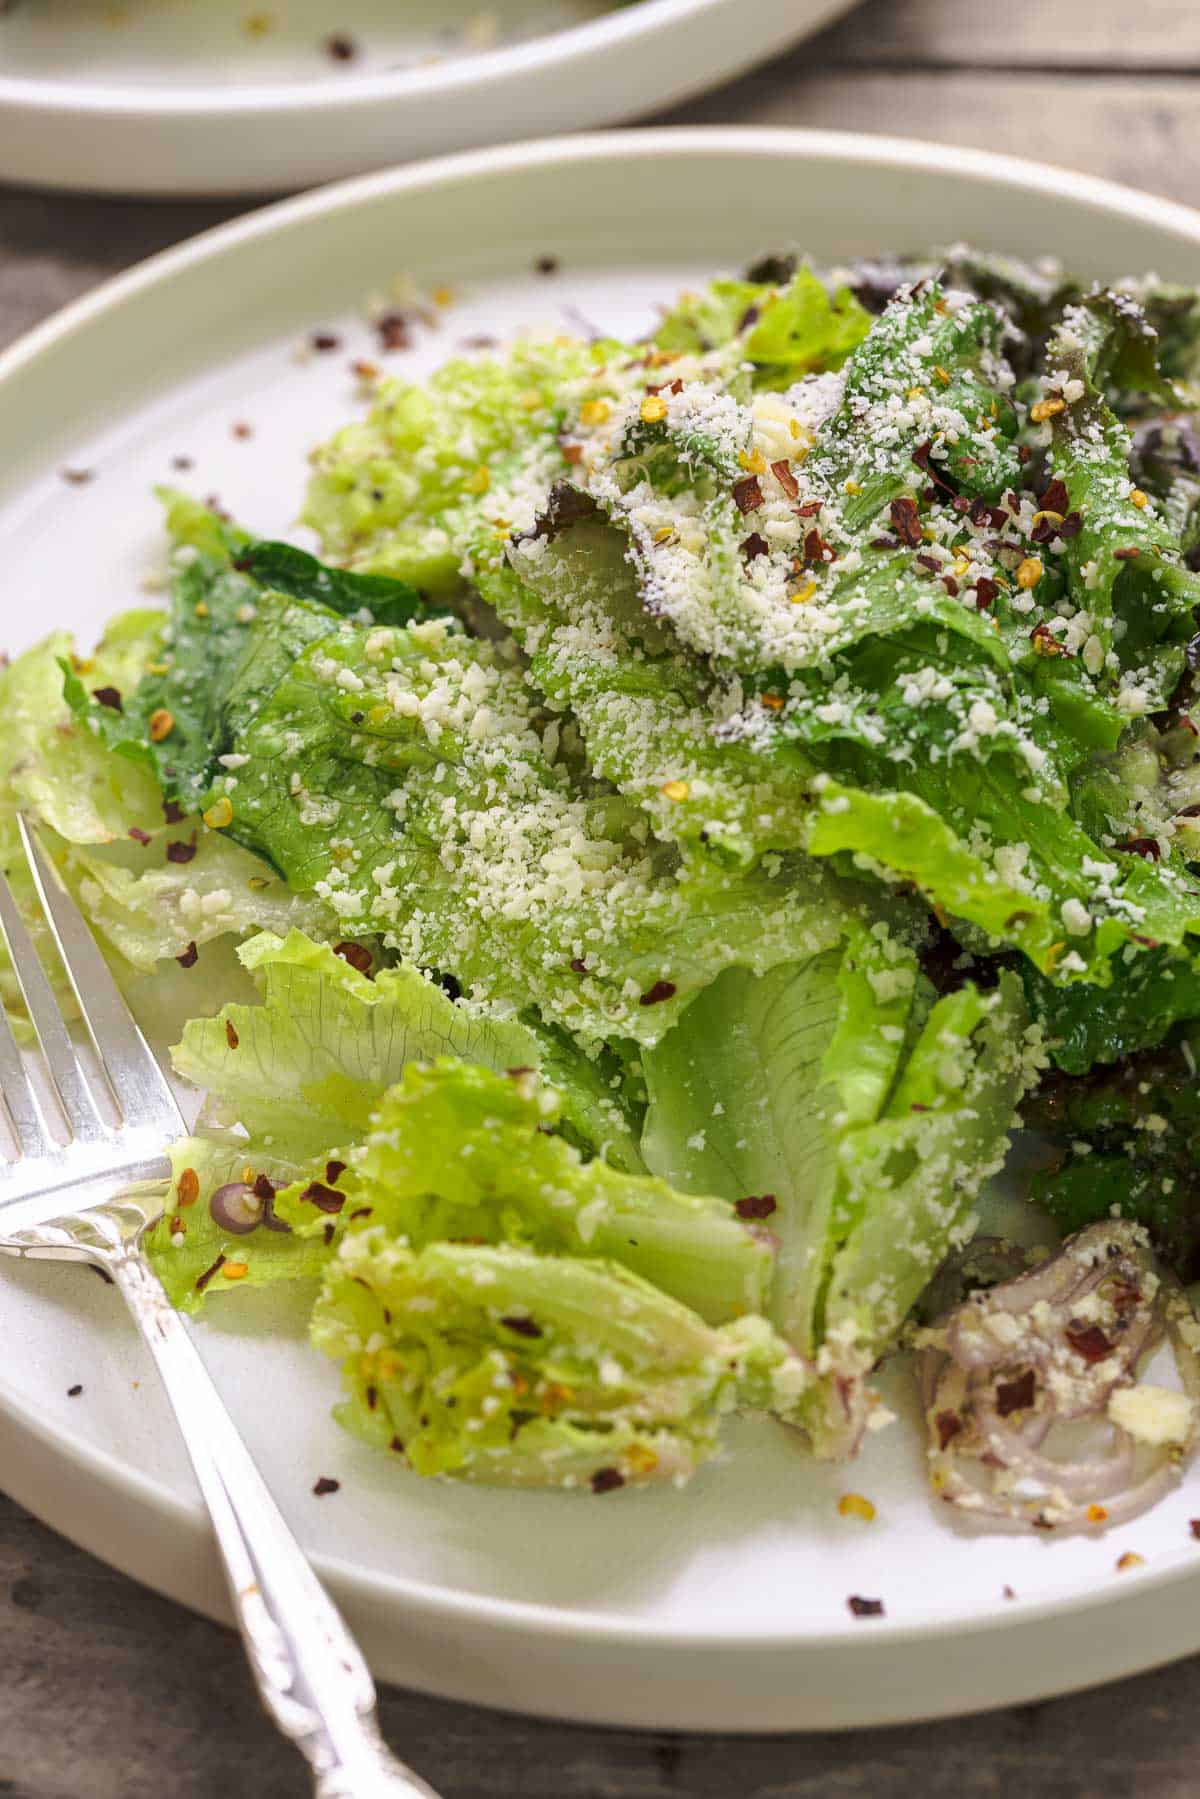 salad with lettuce, parmesan, lemon zest, shallots, and red pepper flakes on a plate.